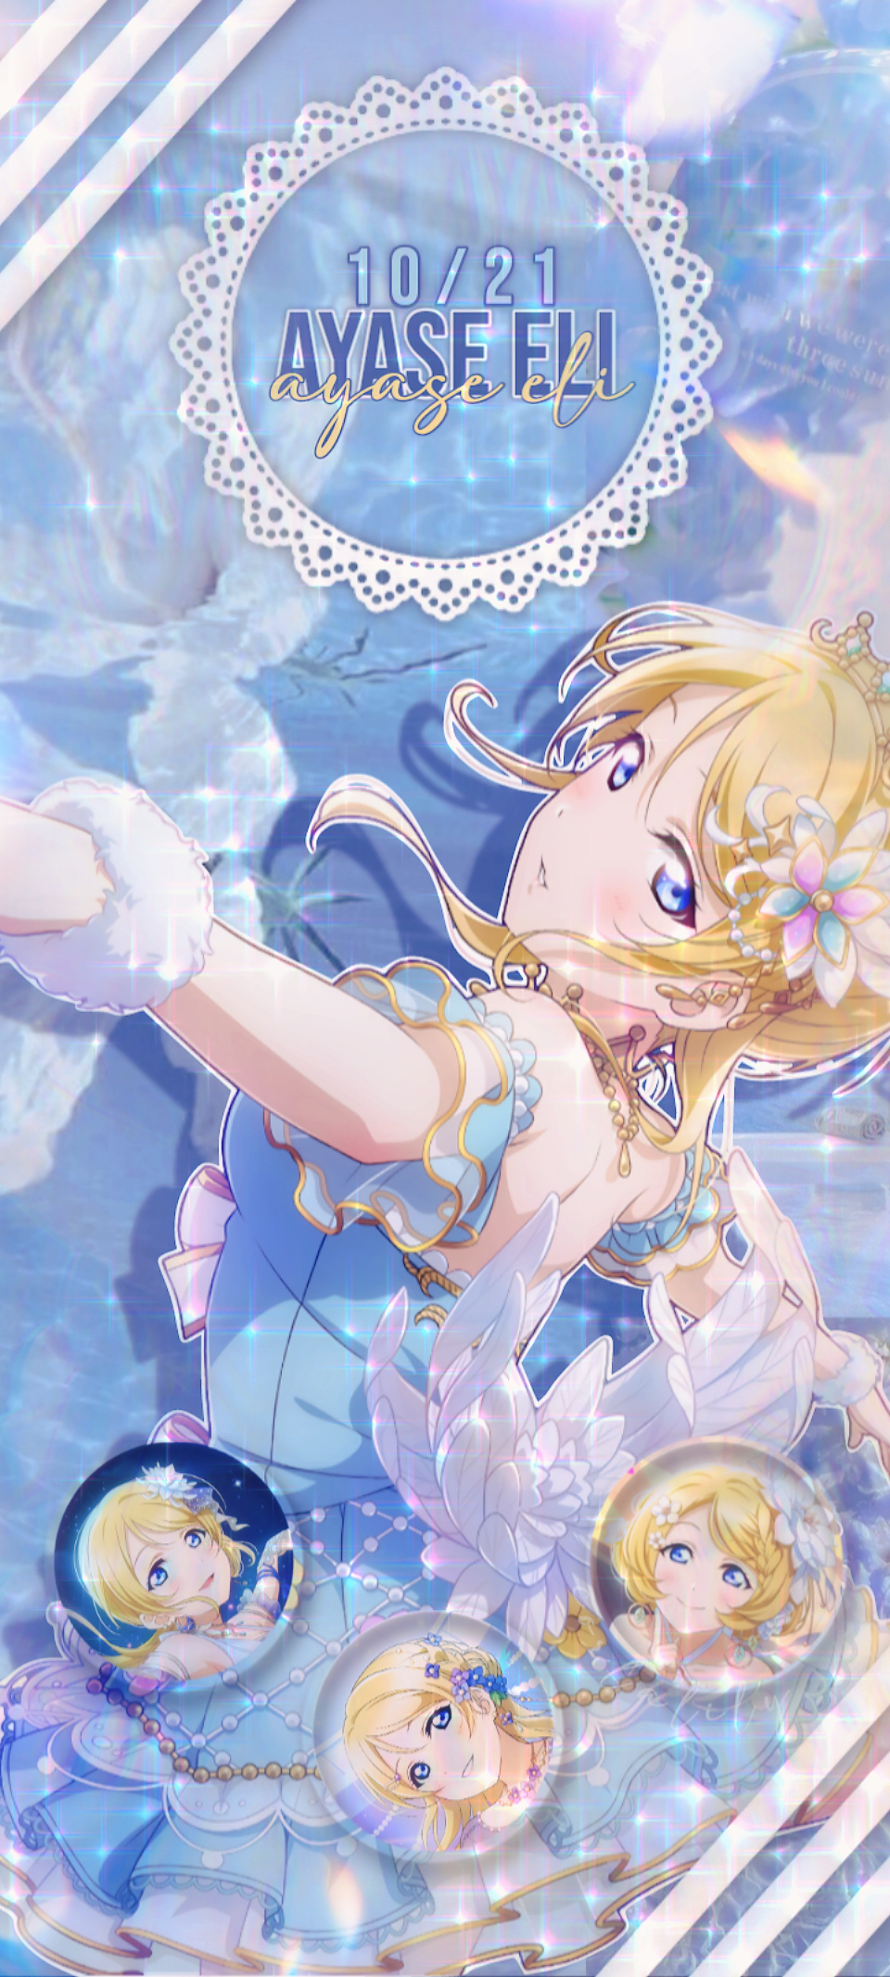 this is my first post here and it just so happened to be eli's birthday so i quickly made this phone...